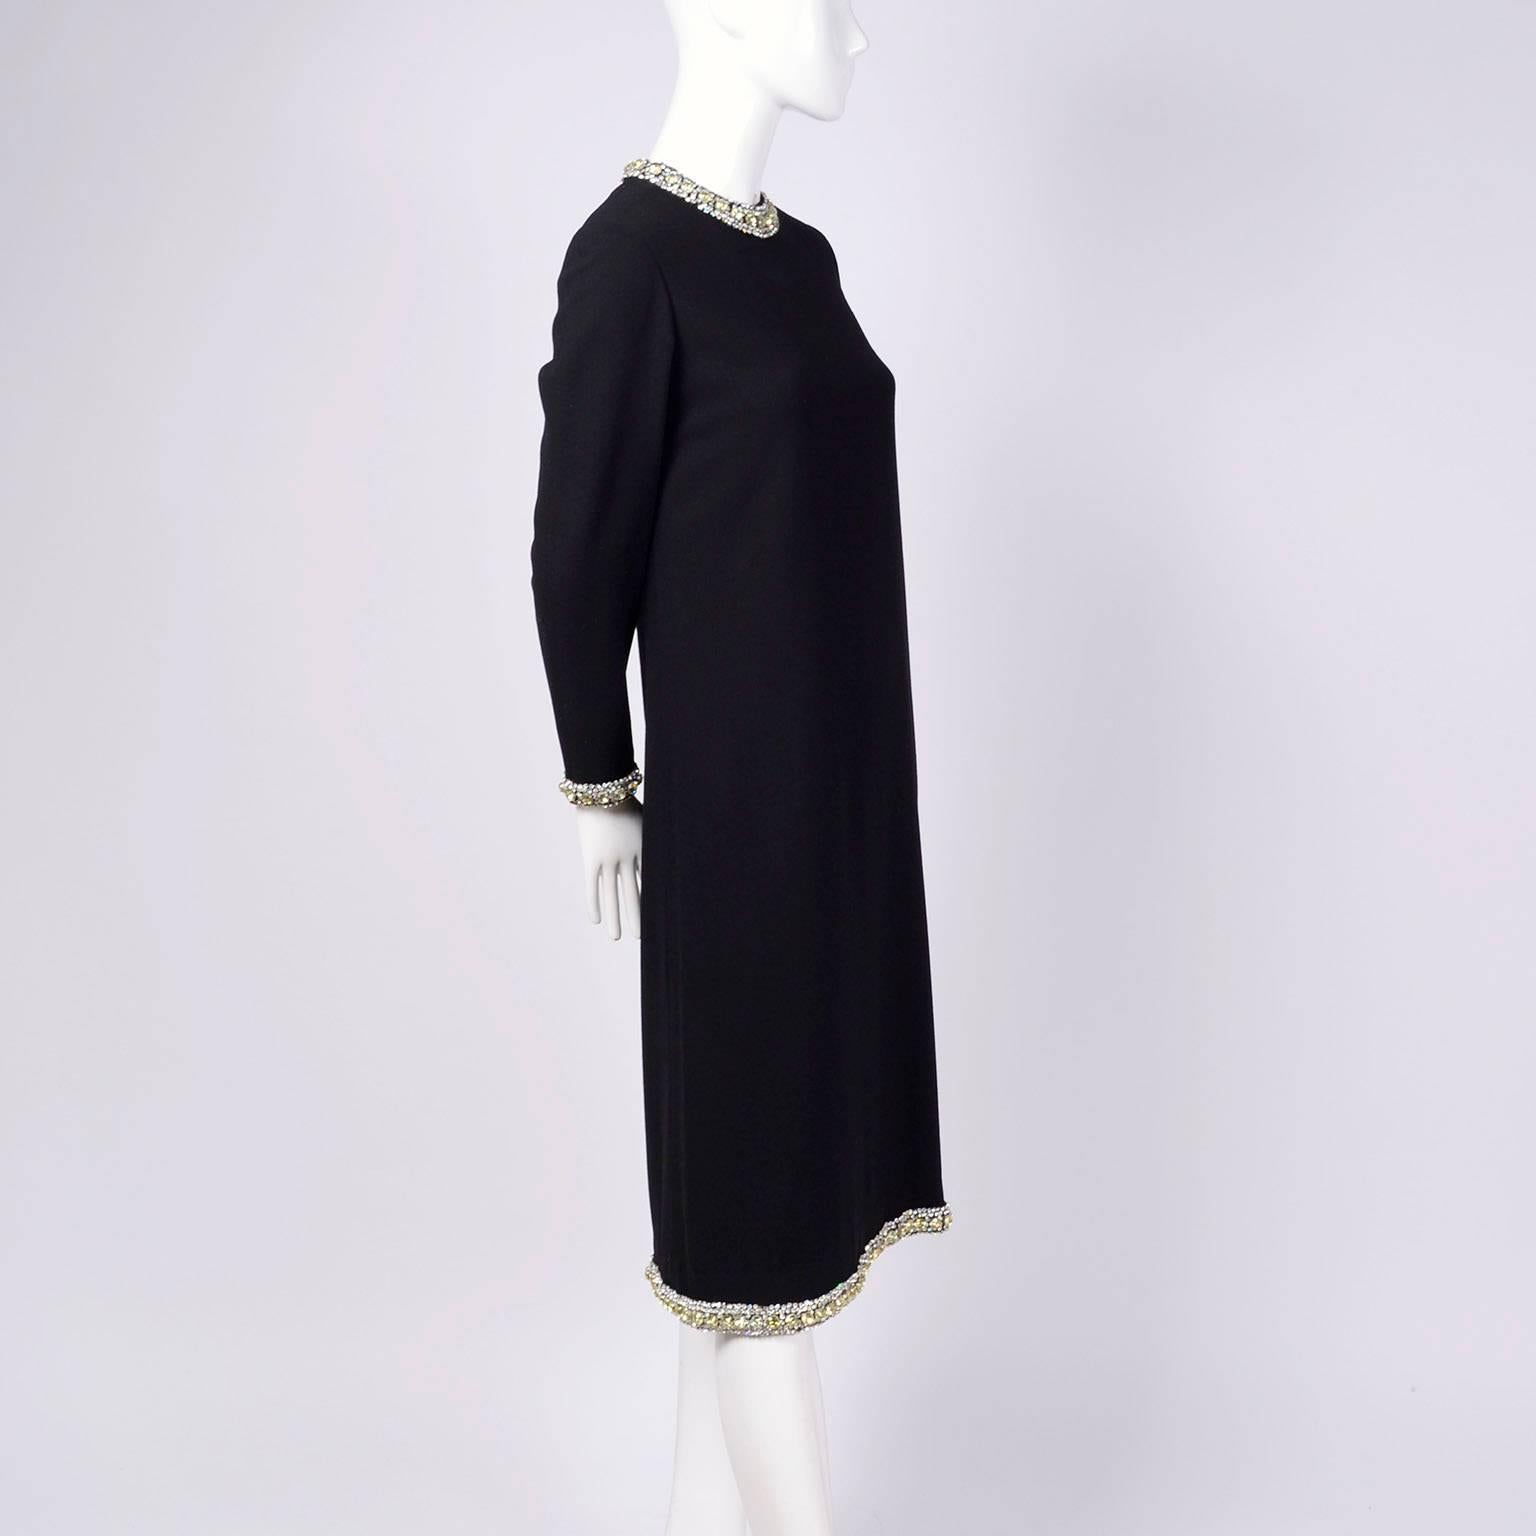 This is a vintage black crepe 1960's Norman Norell dress from a prominent fashion family's private collection.  Please press 